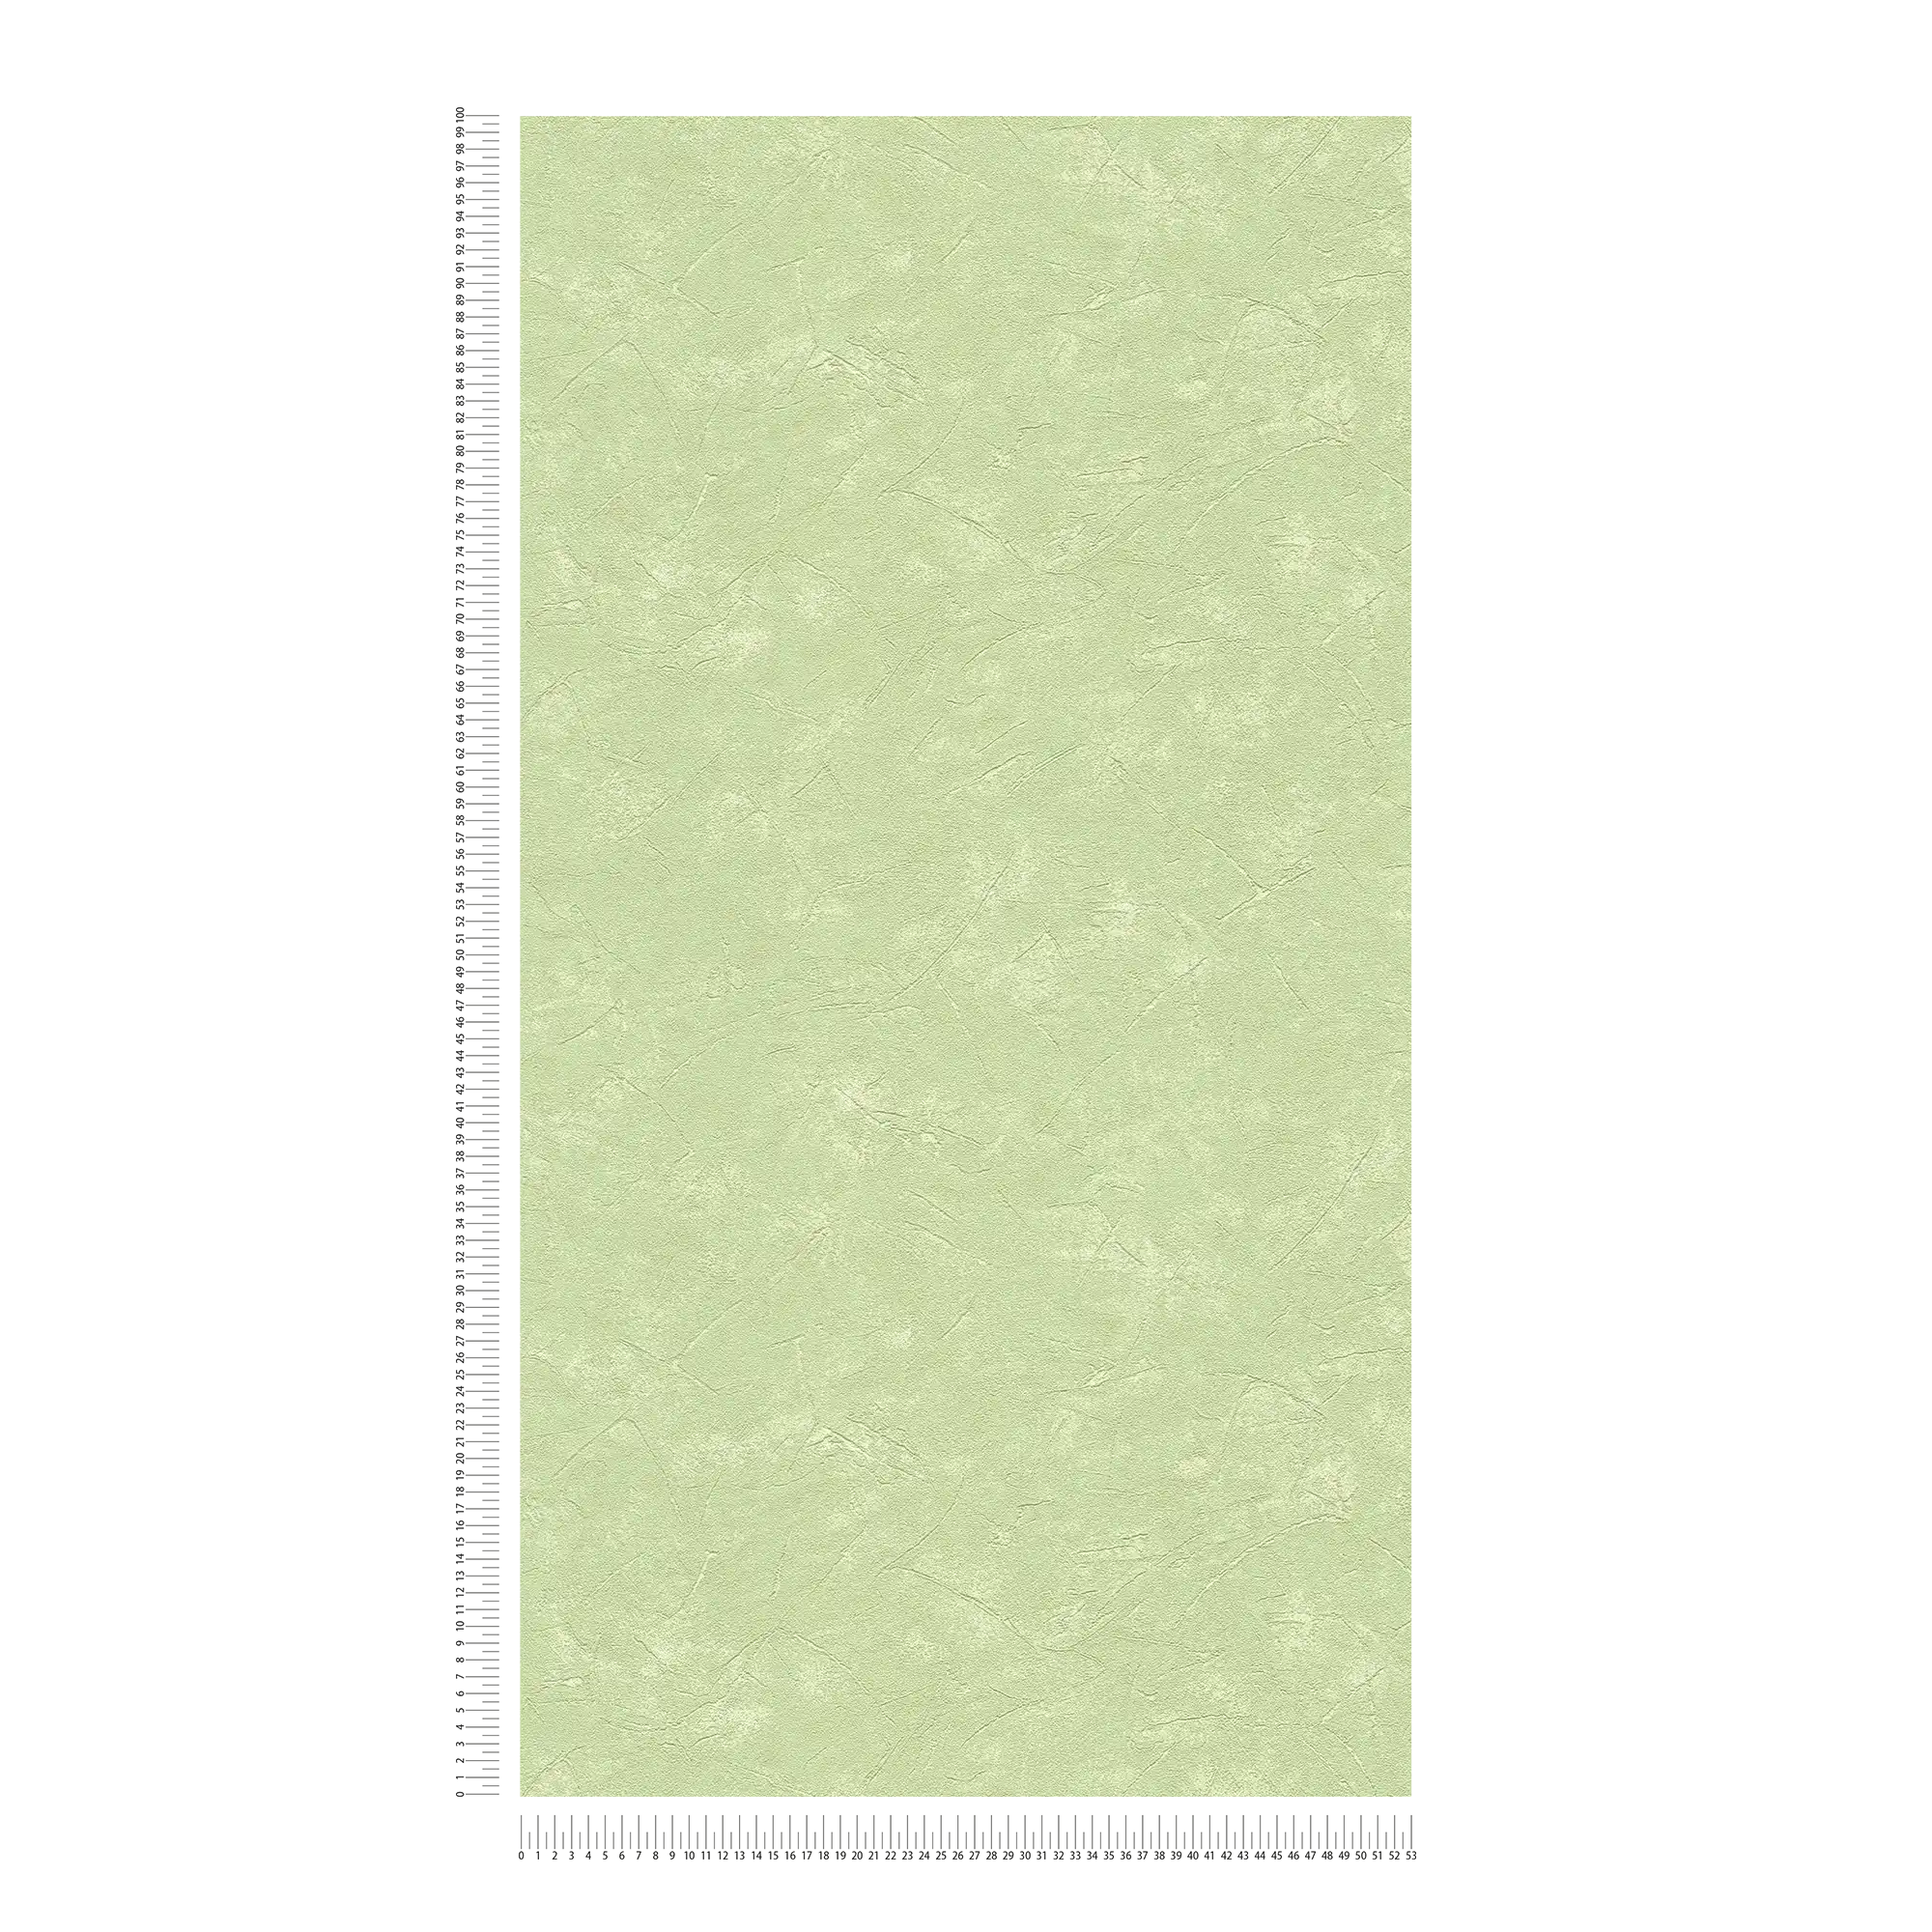             wallpaper plaster look light green with used structure
        